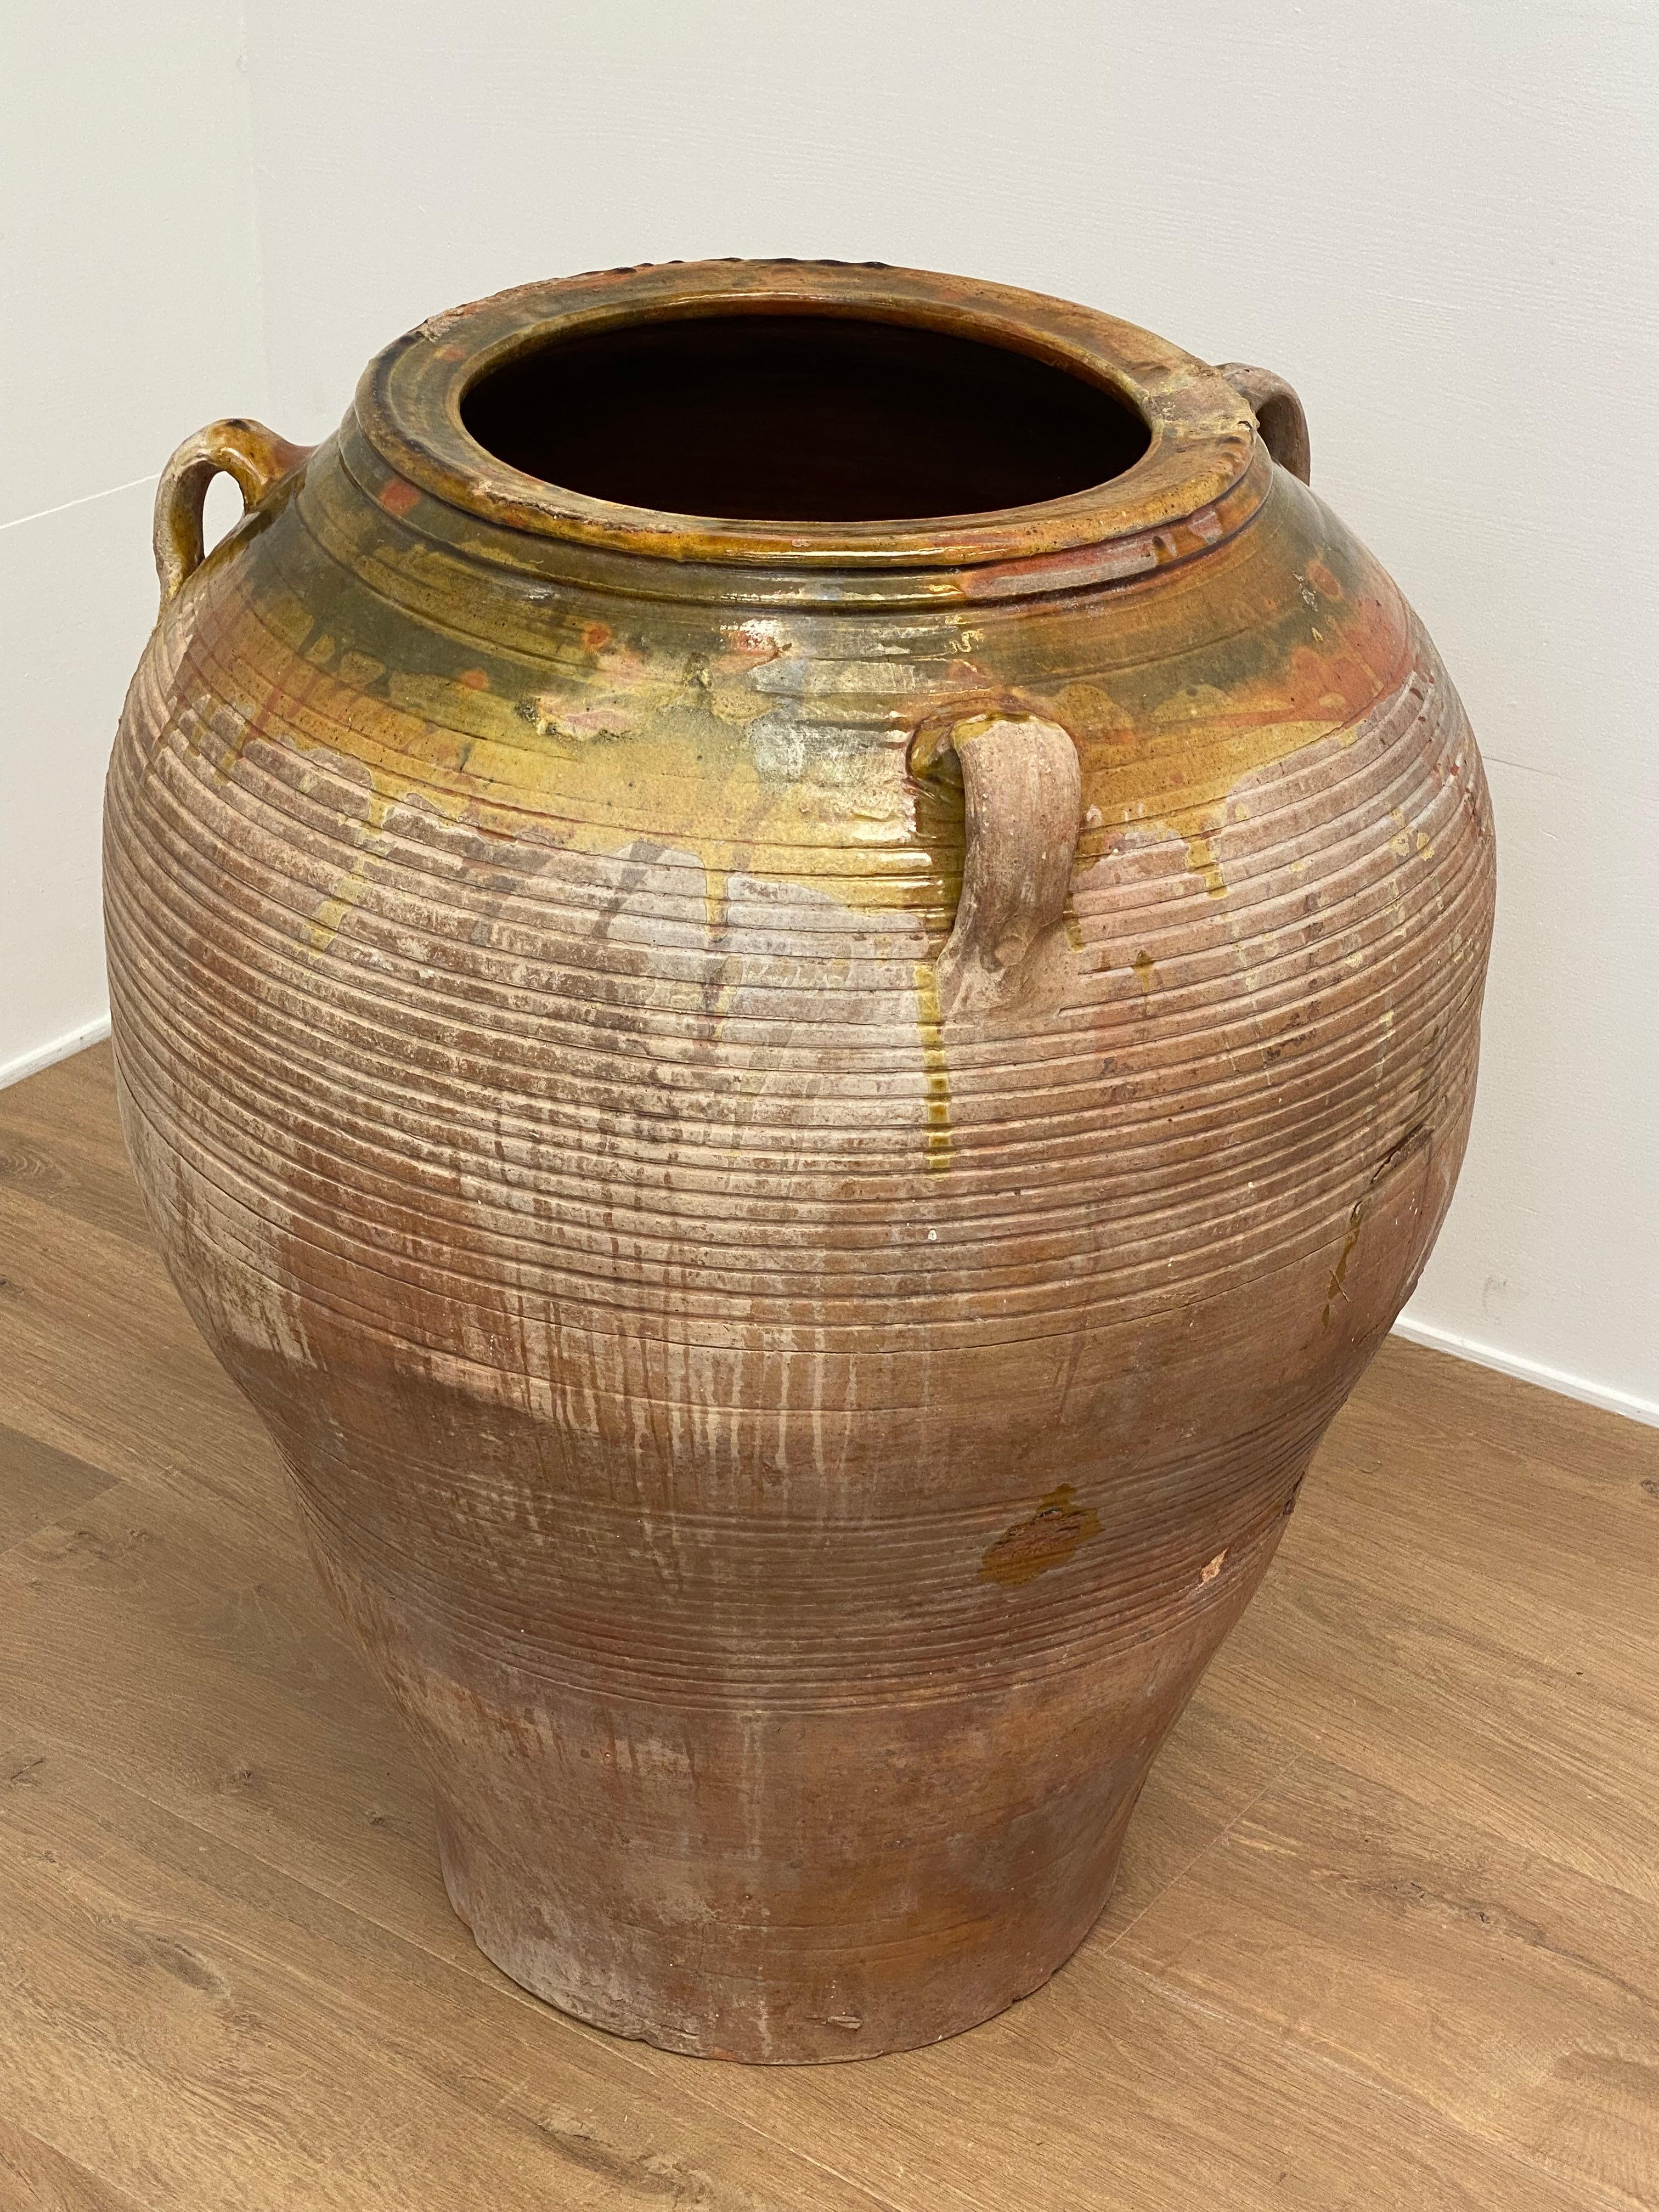 Brutalist, Antique Spanish Olive Jar from The 1930 ies,
the Jar has the classic shape and has a beautiful aged Patina,
there are 4 handles and horizontal lines as decoration,
Yellow and Green drips of glaze,
very decorative vase to be used for